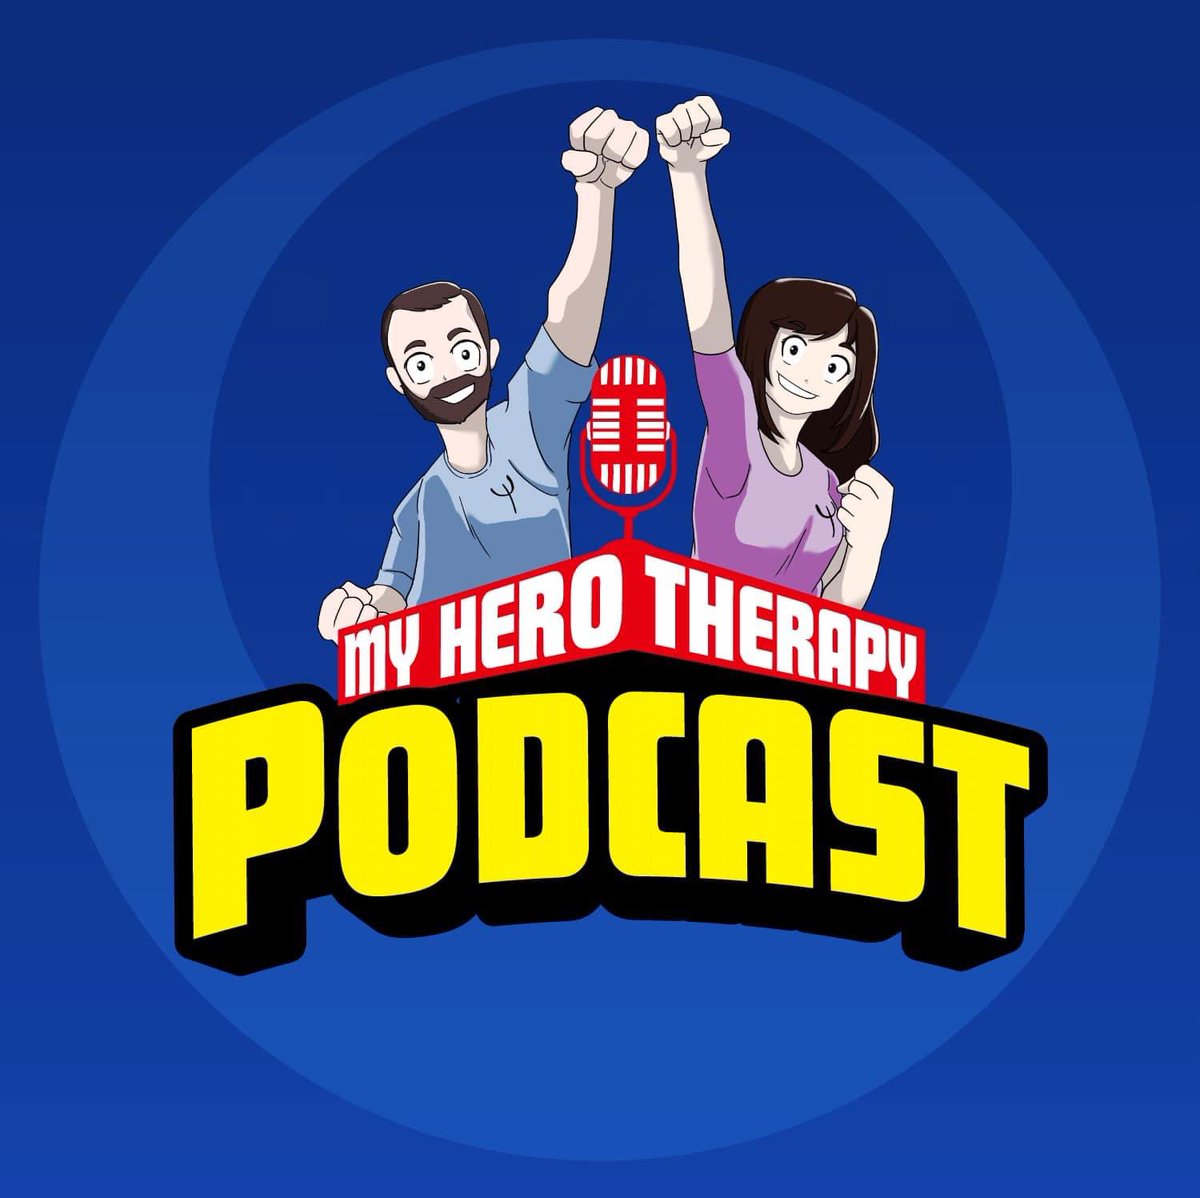 Hello, dear listeners. WE ARE HERE! With a brand new episode! Episode 1: Izuku Midoriya Origin is now up for your listening pleasure. The episode is available here or on Spotify, iHeart radio, Google, and Amazon! myherotherapypodcast.podbean.com #anime #MyHeroAcadamia #podcast #therapy